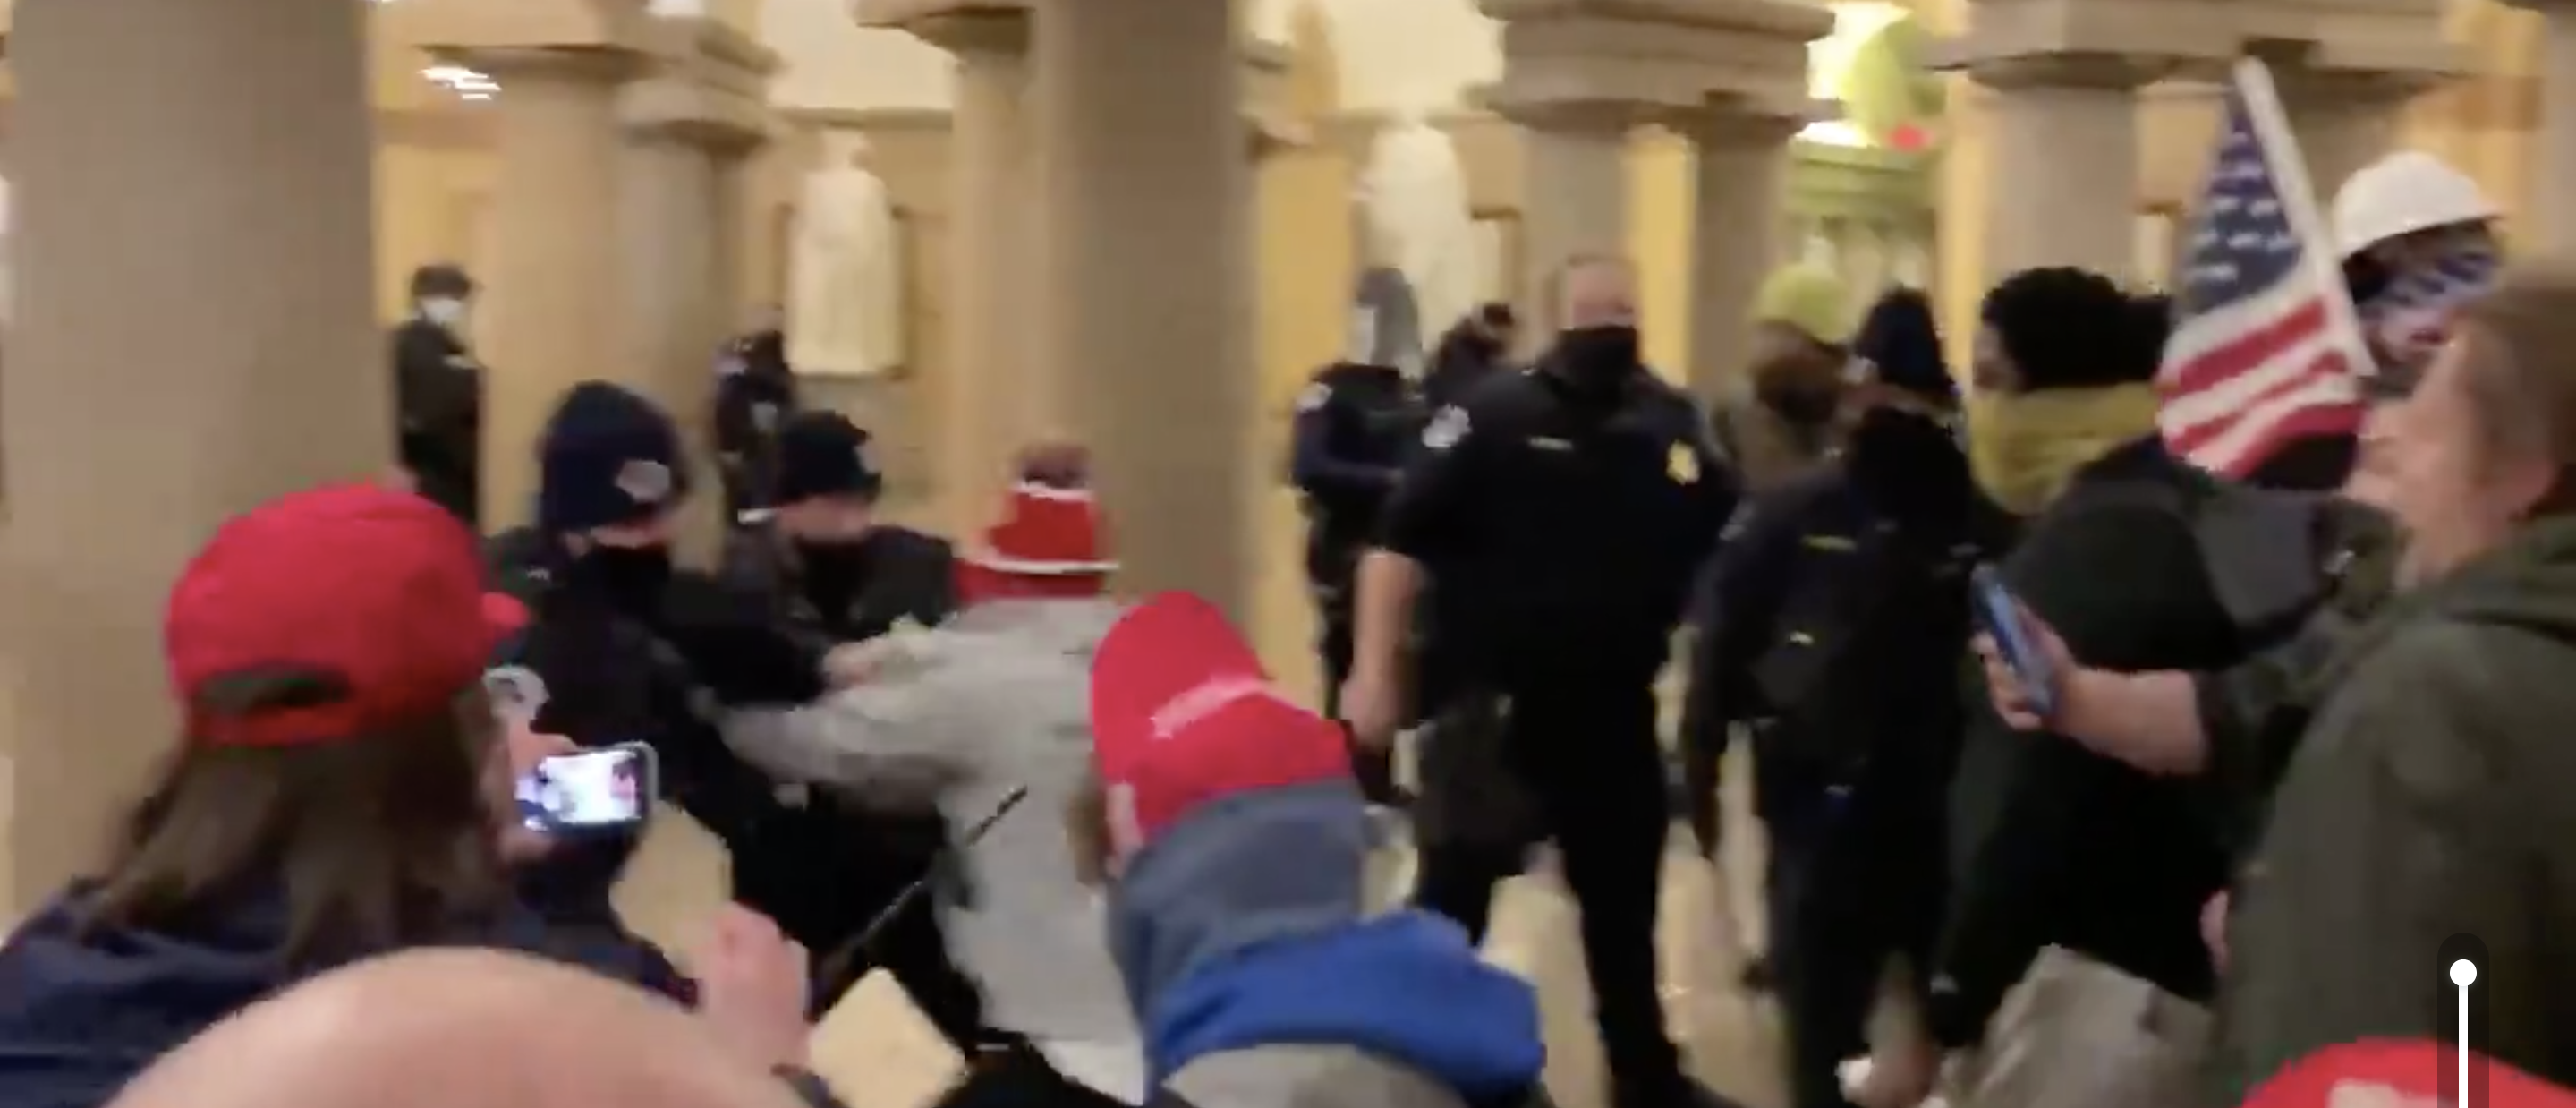 Rioters brawl with police officers after storming the Capitol Building (Screenshot/Twitter Elijah Schaffer)